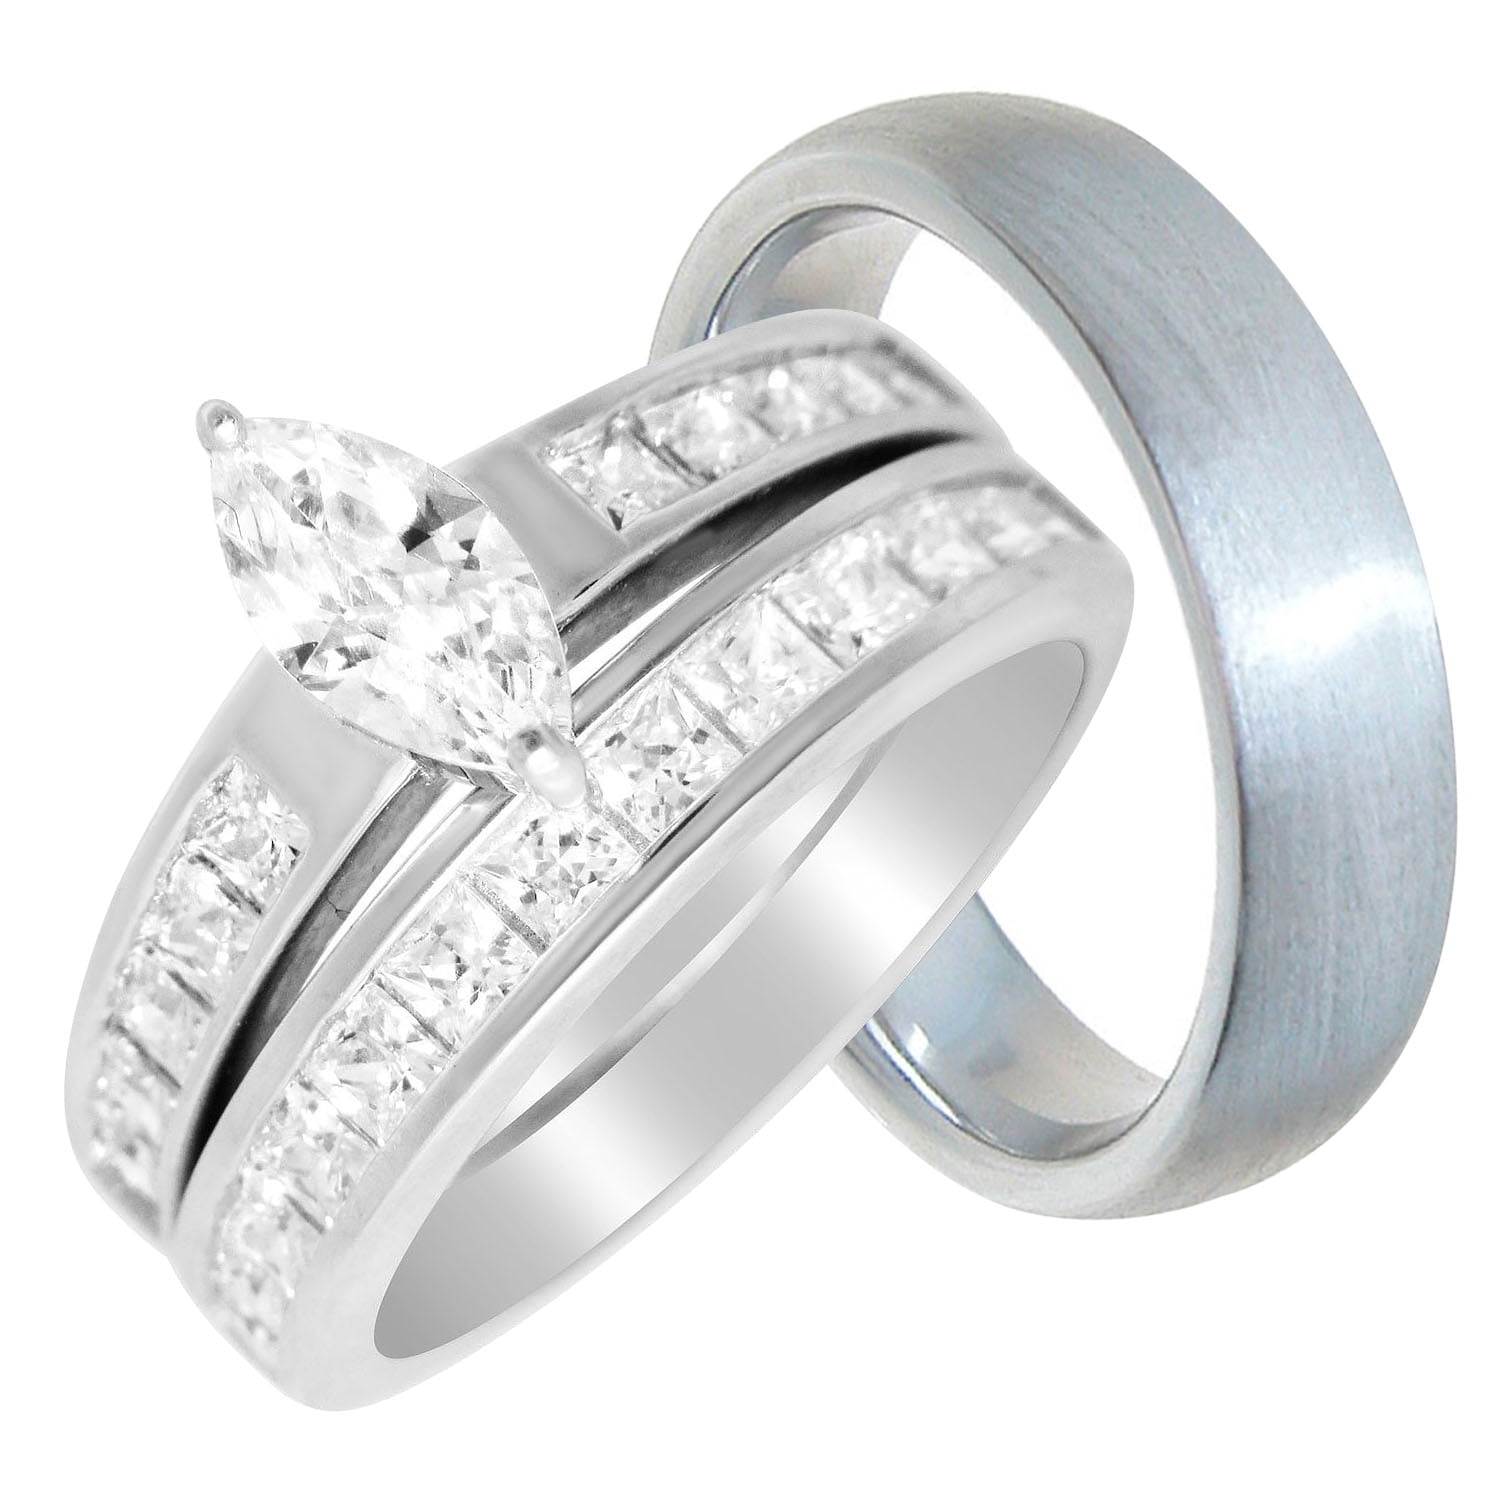 LaRaso & Co - His Hers Wedding Rings Set Cheap Wedding Bands for Him Her 7/8 - literacybasics.ca